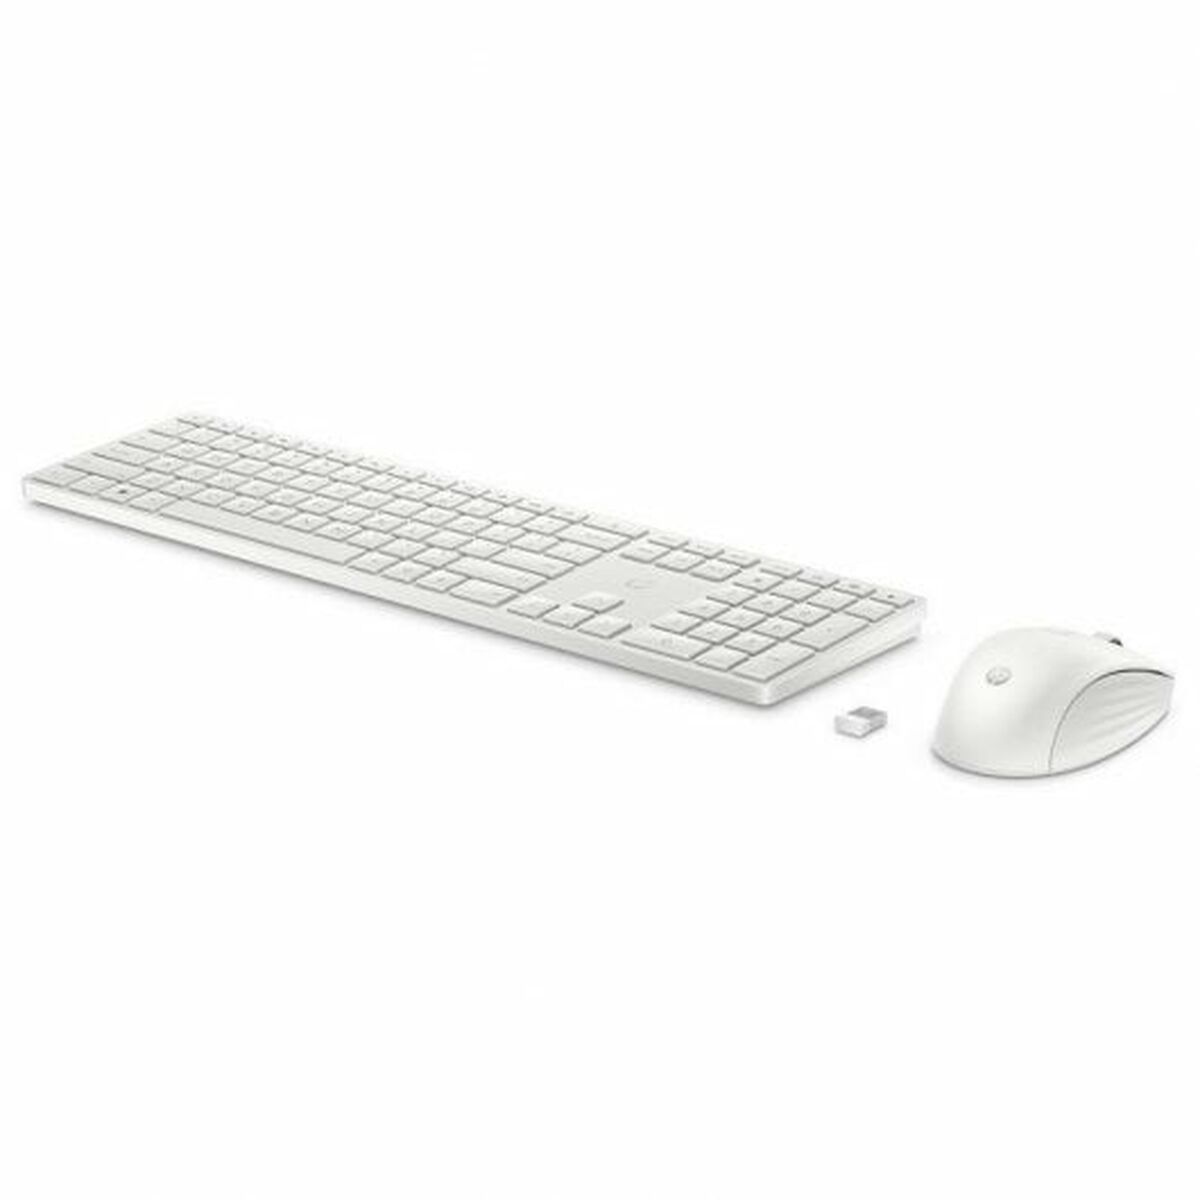 Keyboard and Wireless Mouse HP 650 White Spanish Qwerty